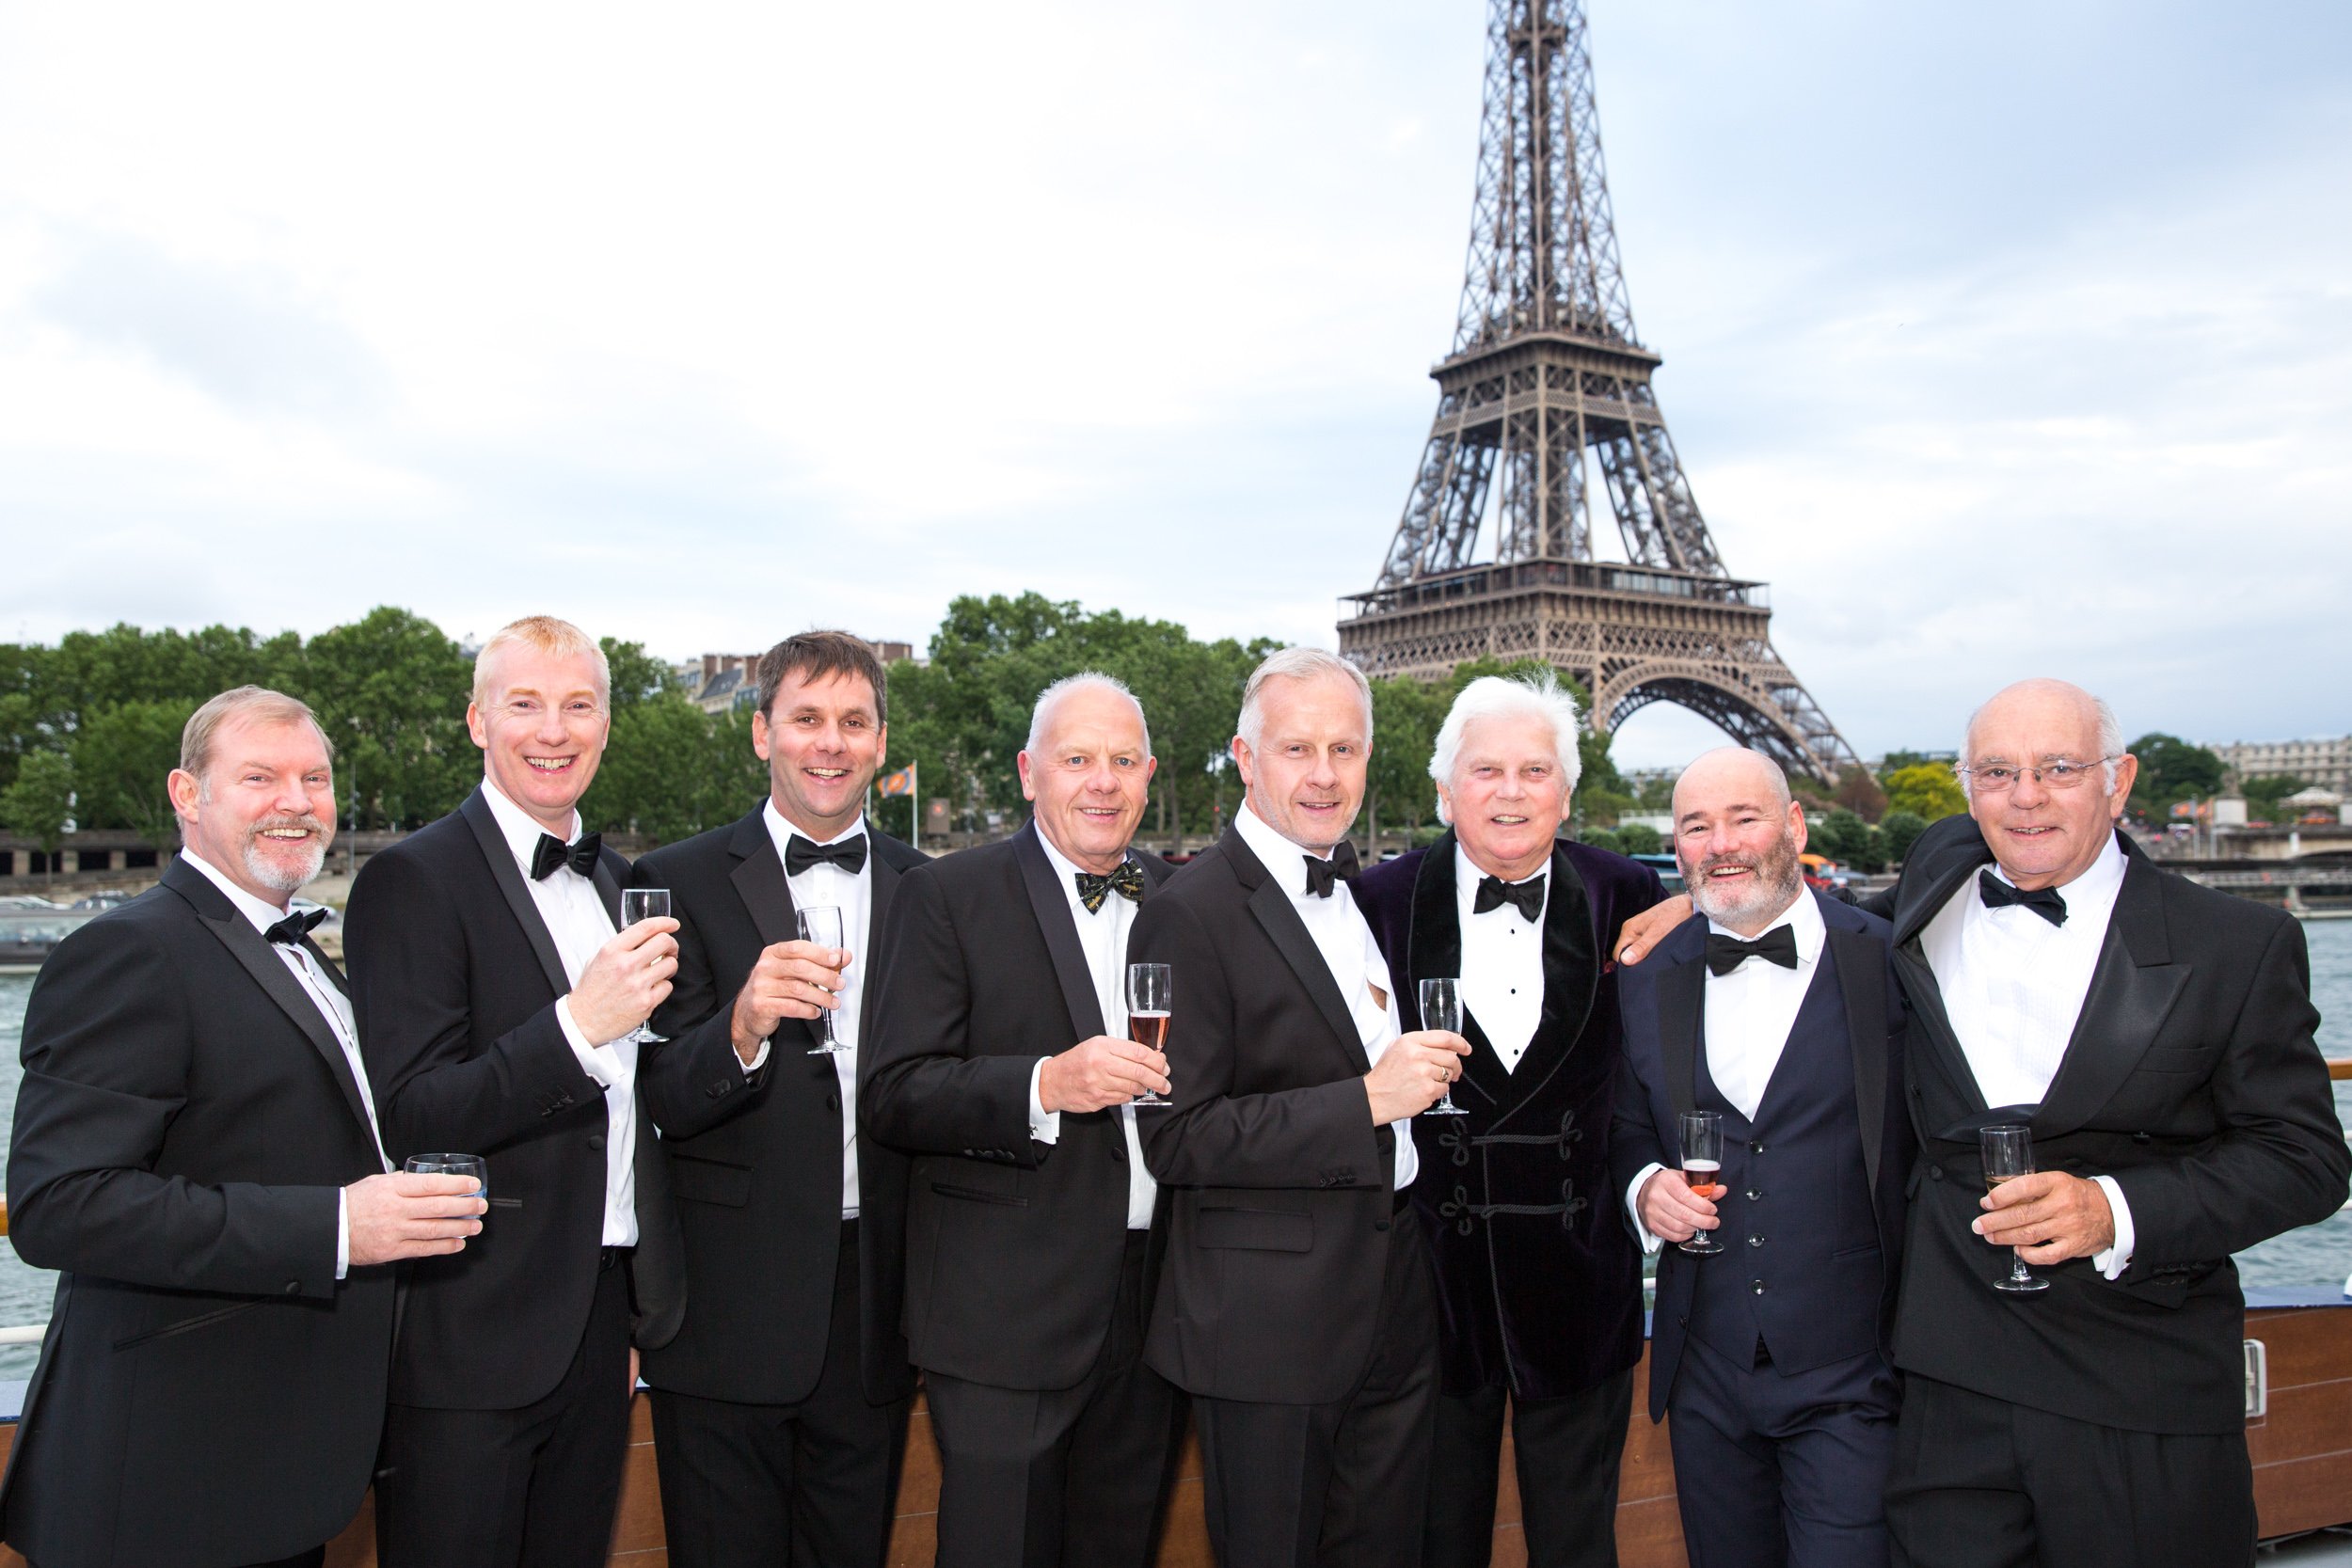  group-of-ceo-guests-toast-future-by-seine-on-river-cruise 